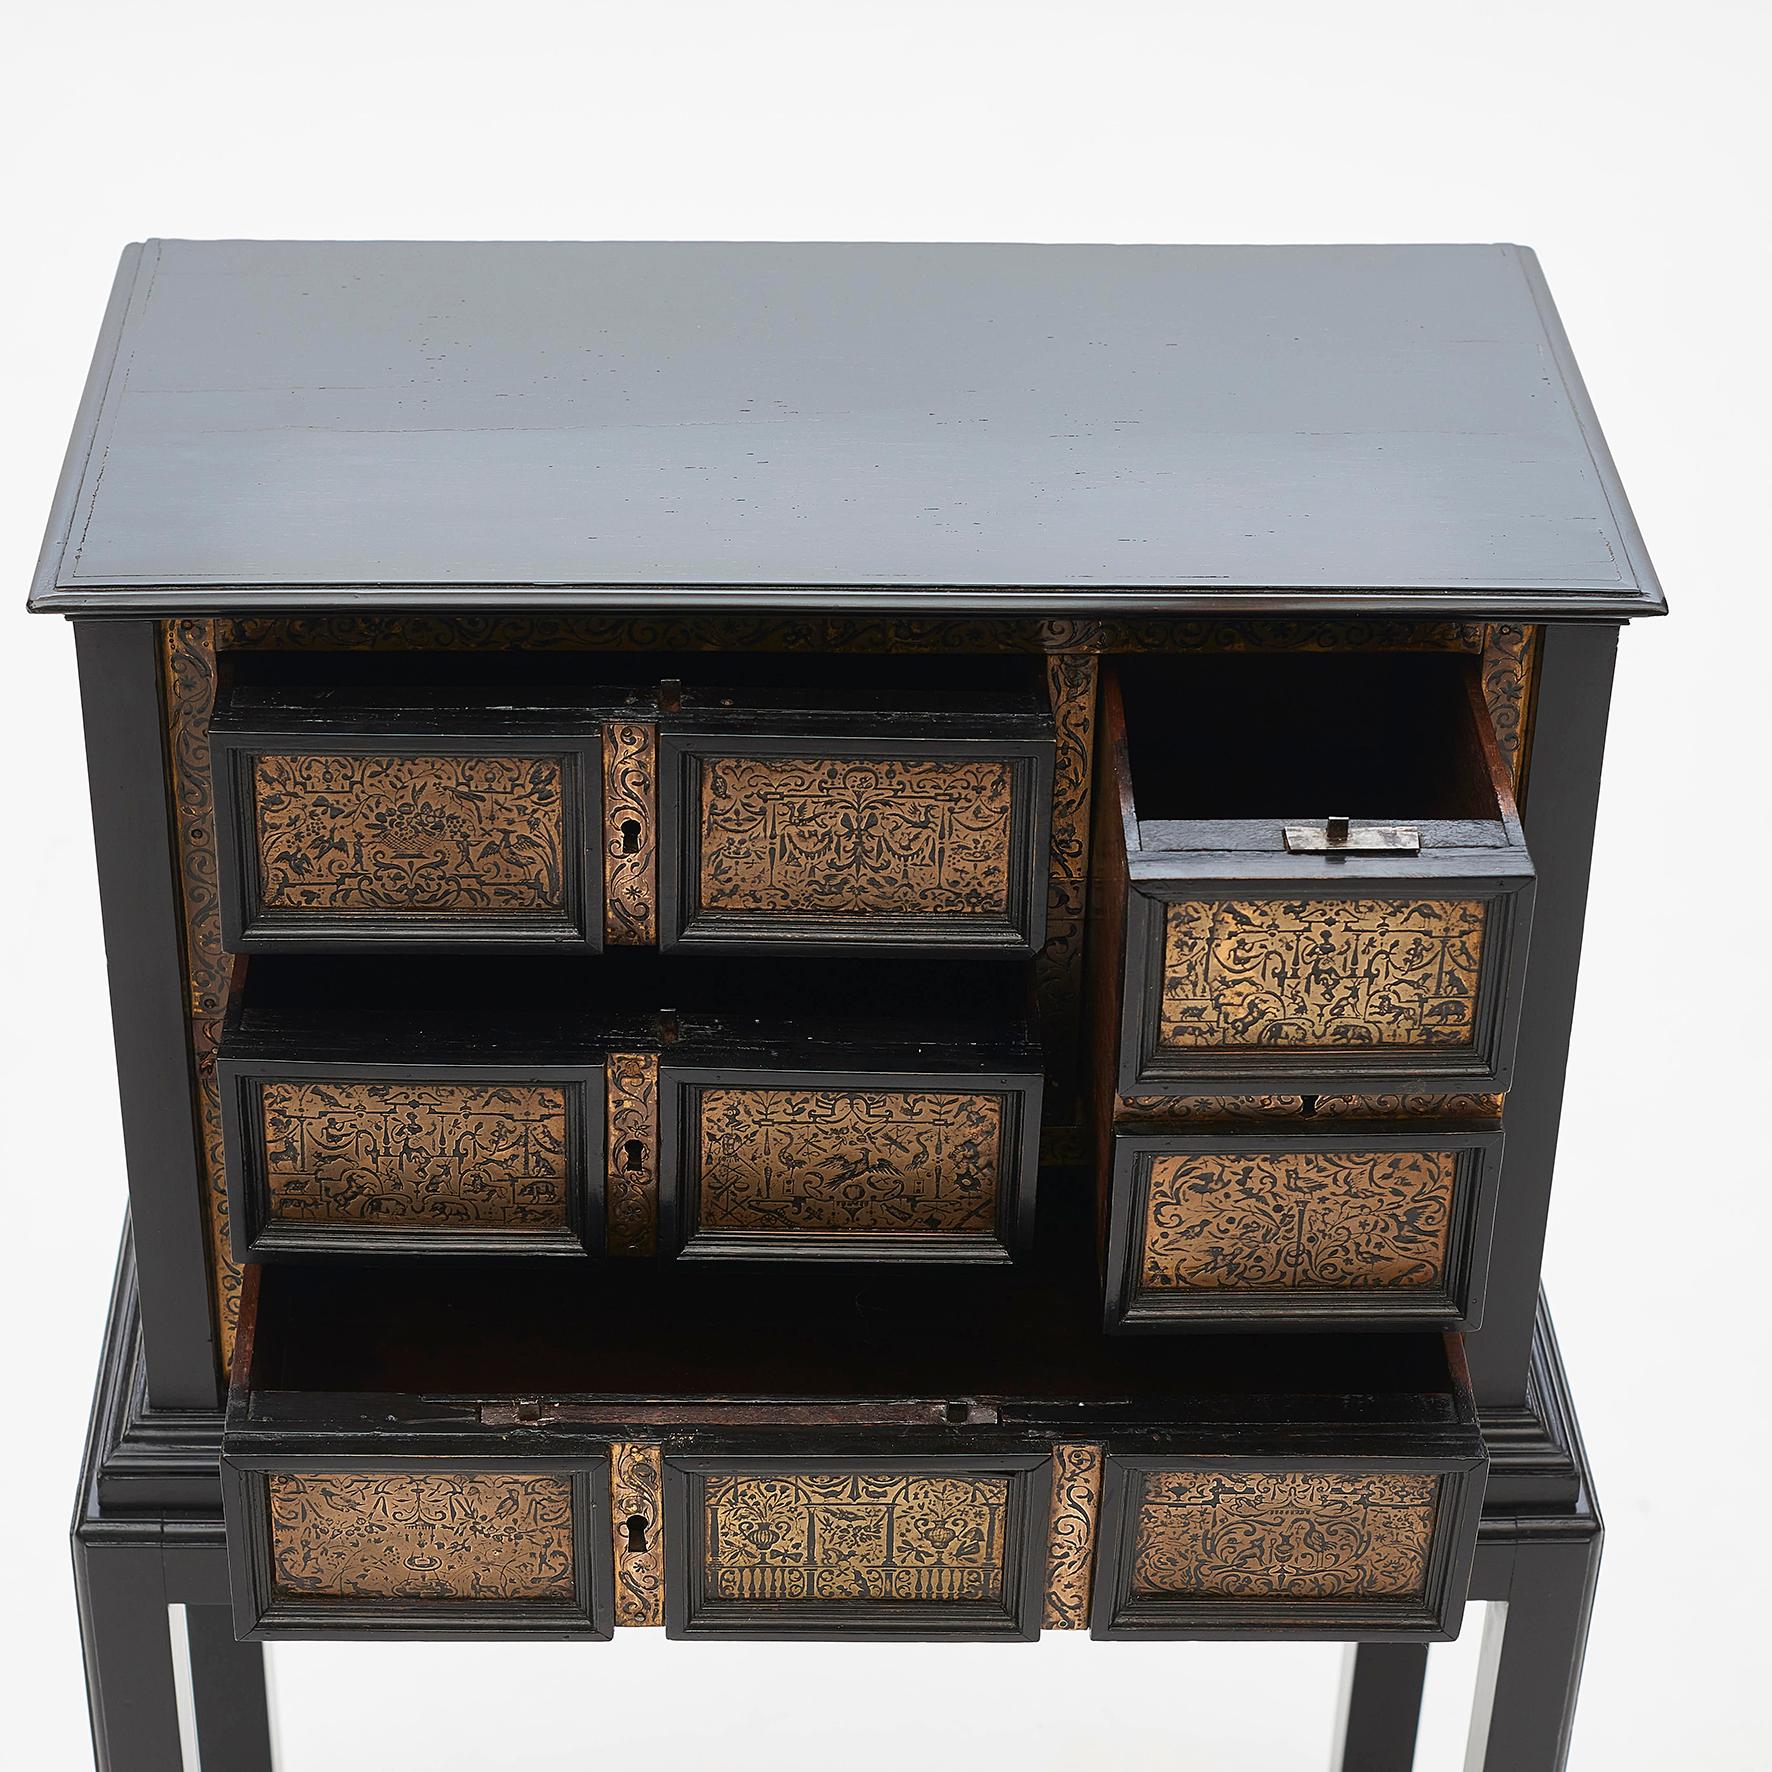 Italian Small Elegant Baroque Cabinet in Ebonized Wood with Ornamented Brass Engravings